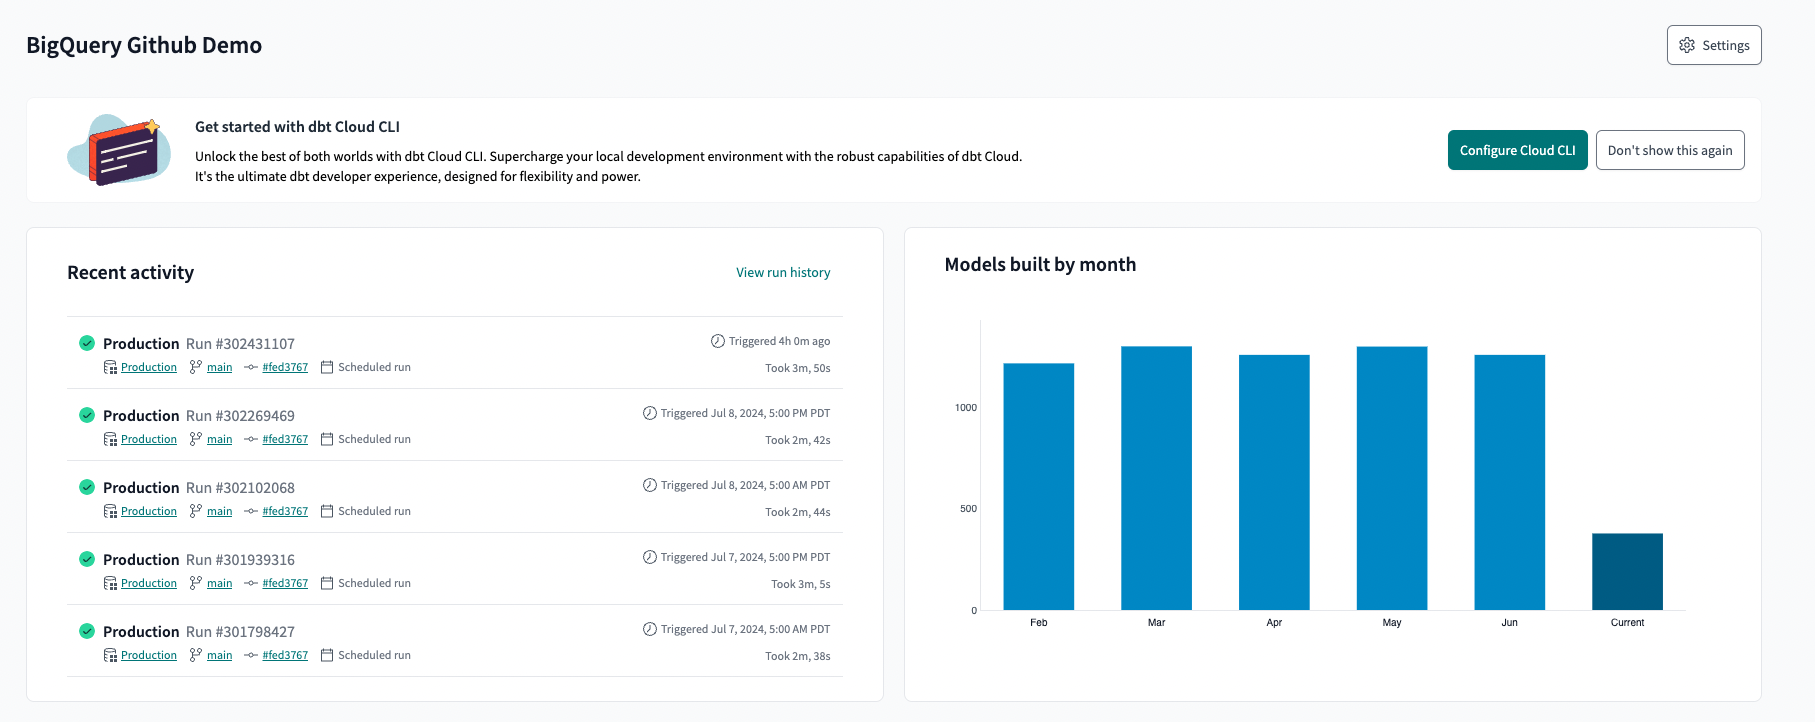 Your Project home page displays how many models are built each month.